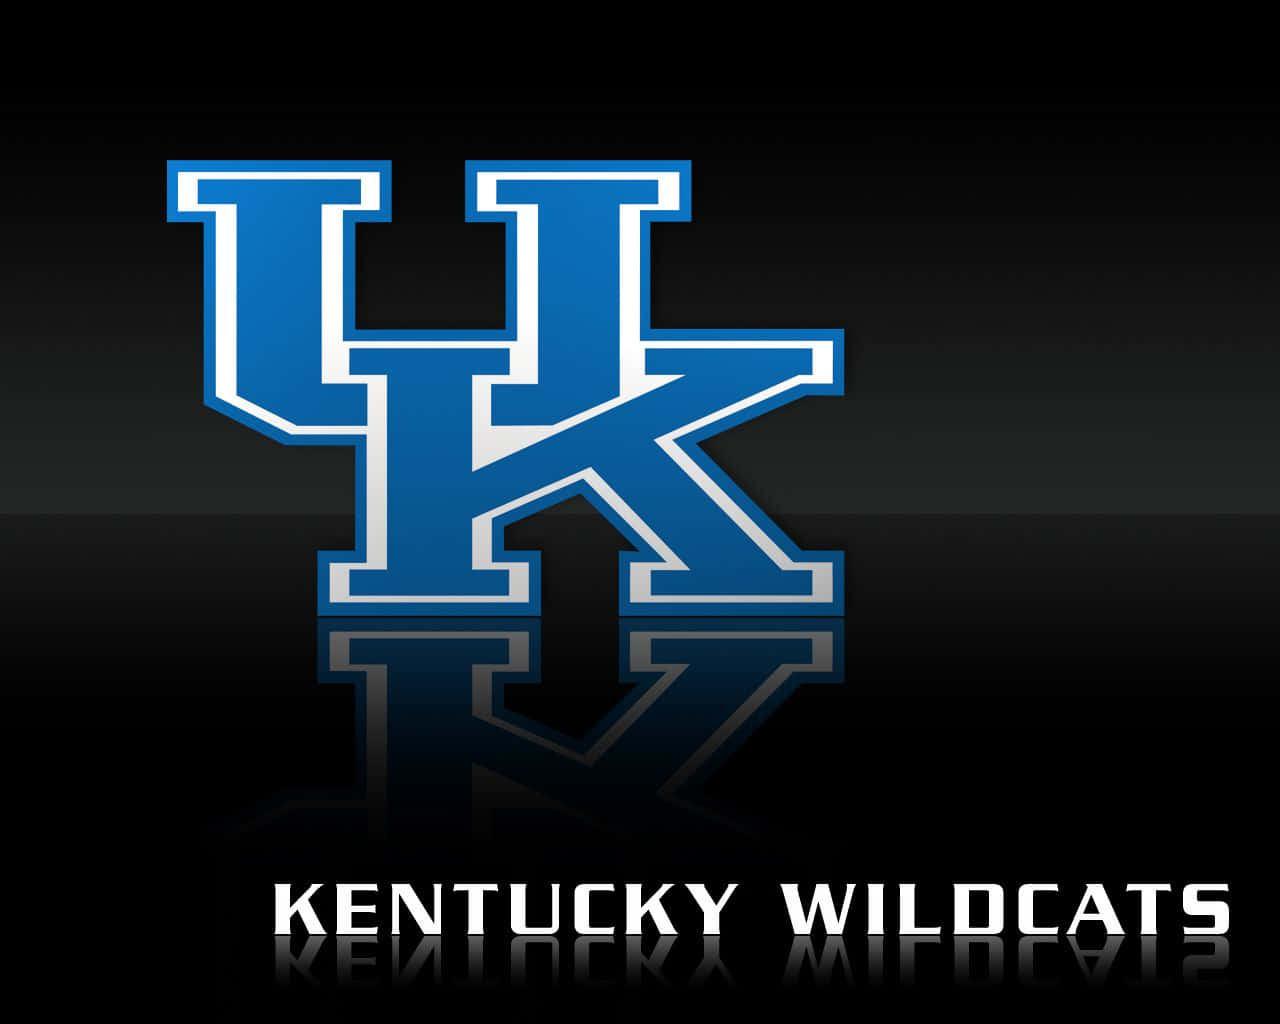 The University of Kentucky Wildcats take the court in a thrilling home matchup Wallpaper